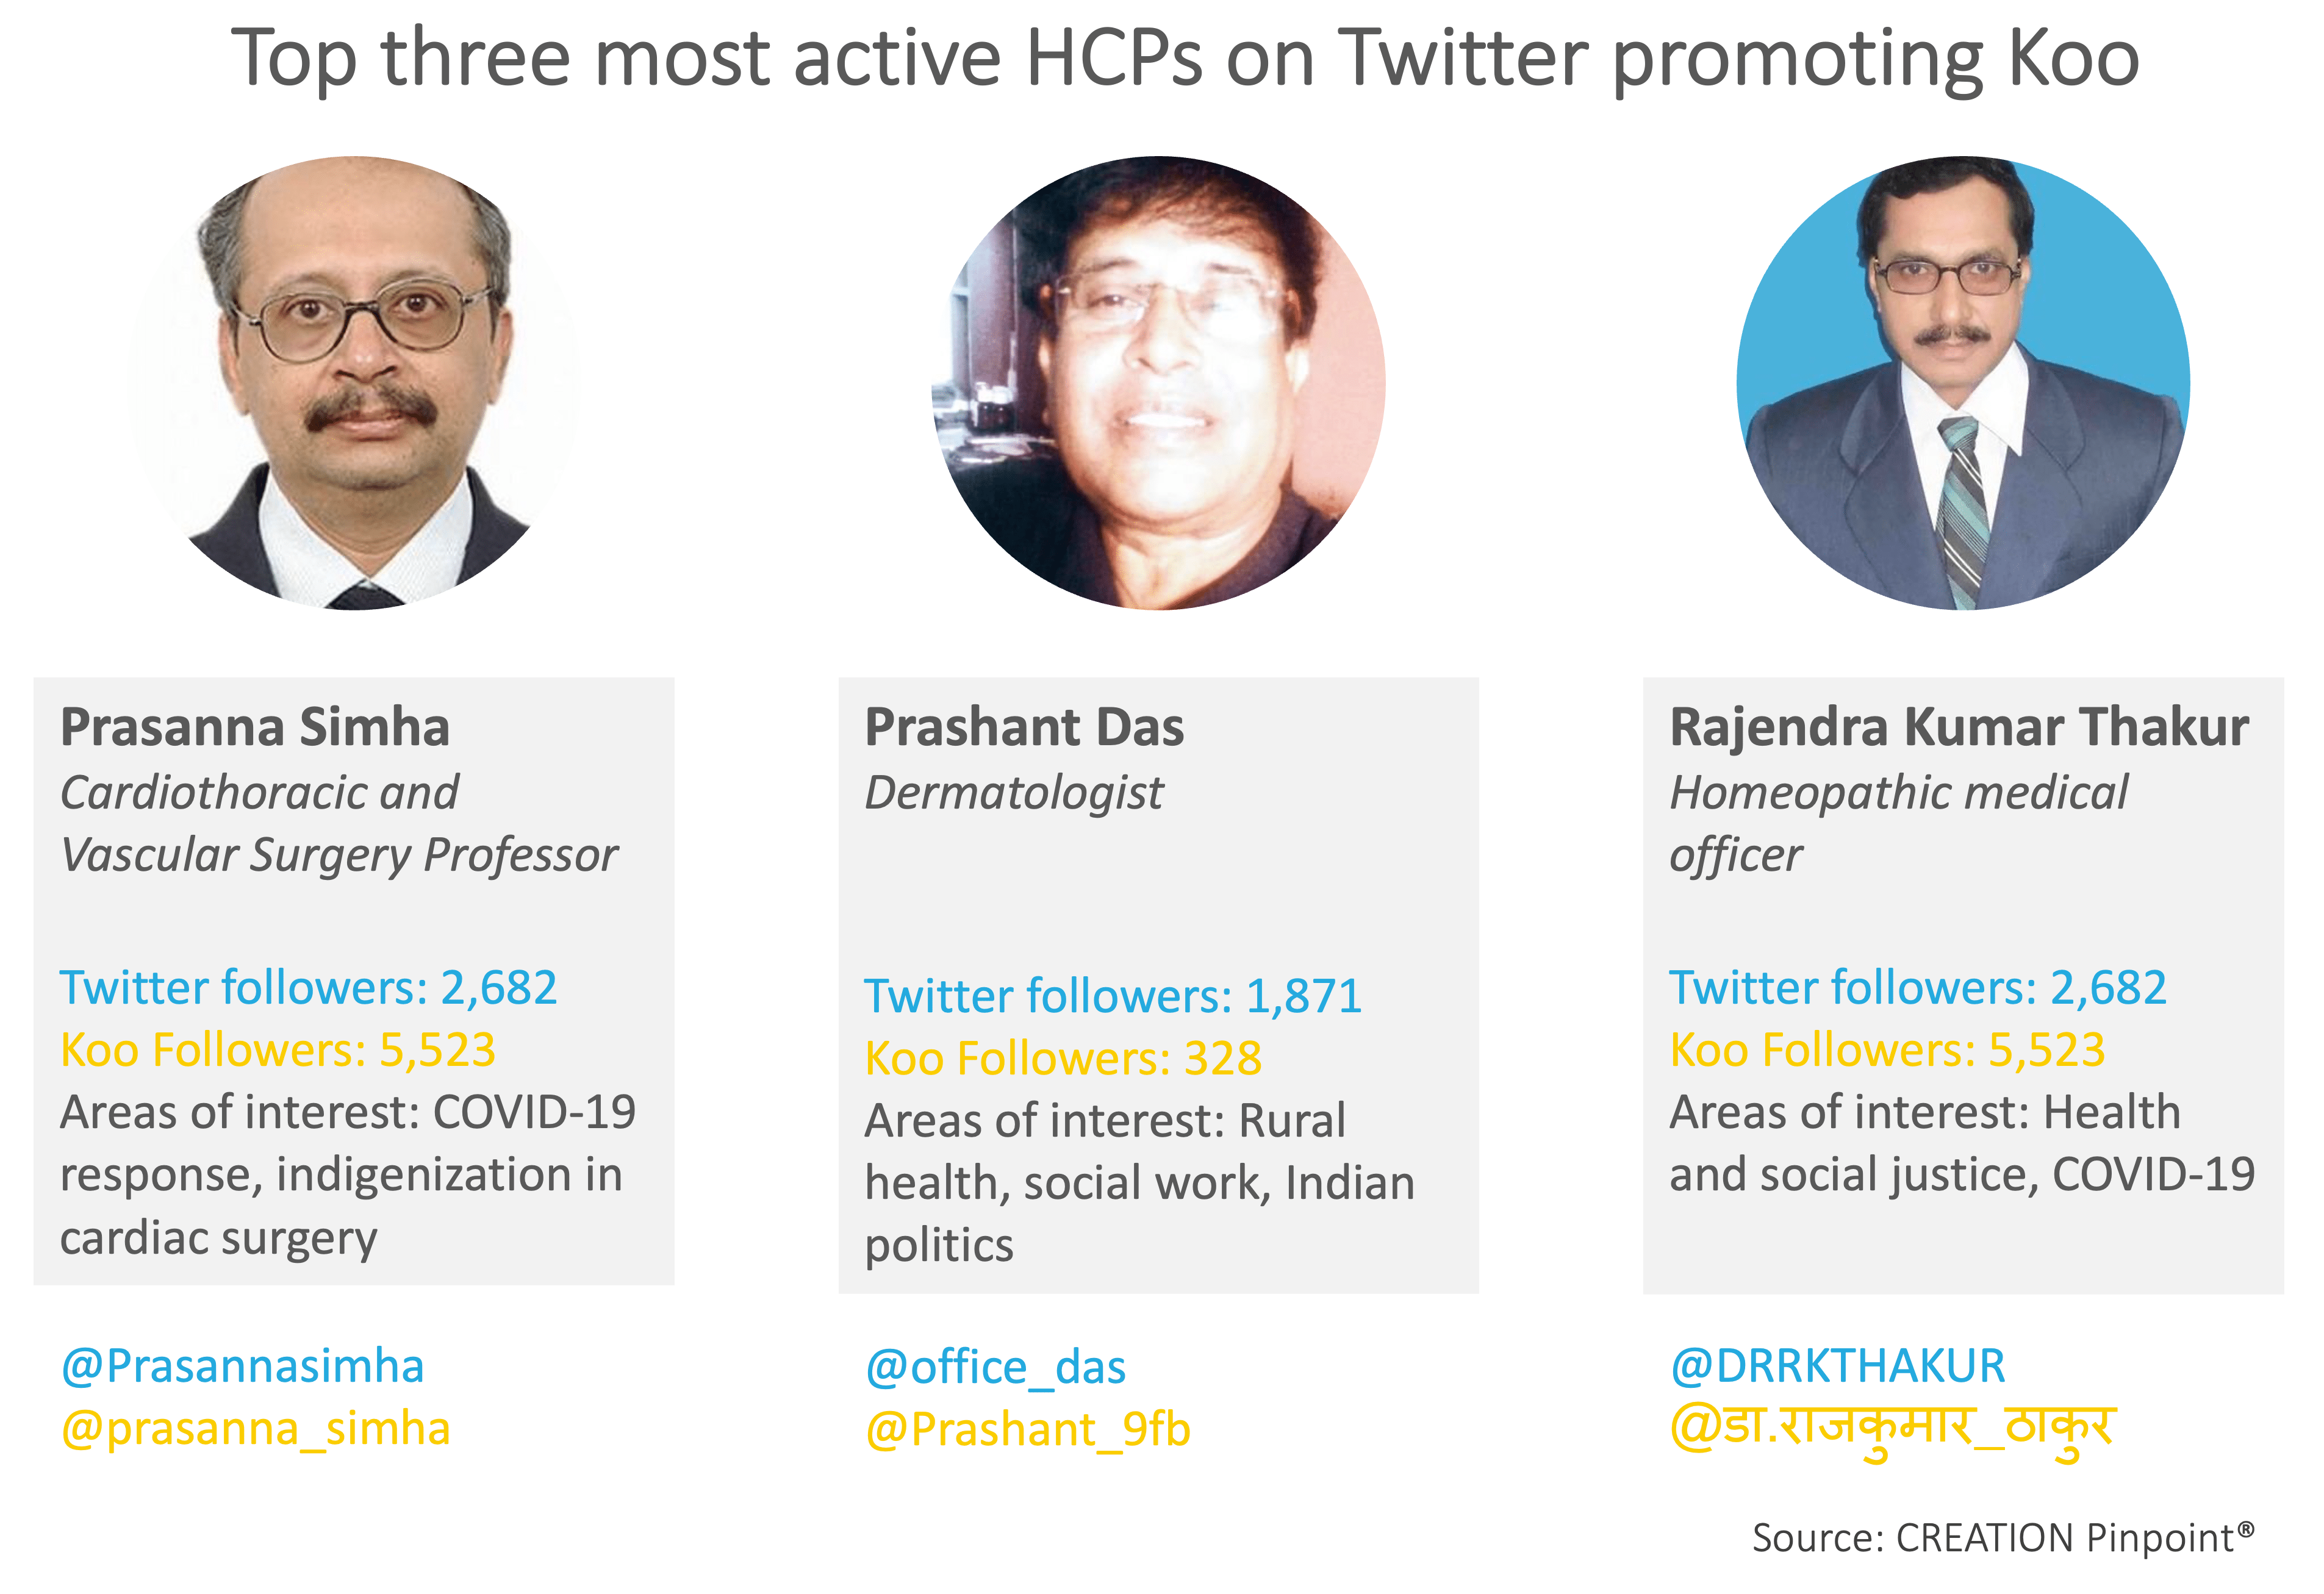 Image showing the three most active HCPs on Twitter promoting KOO